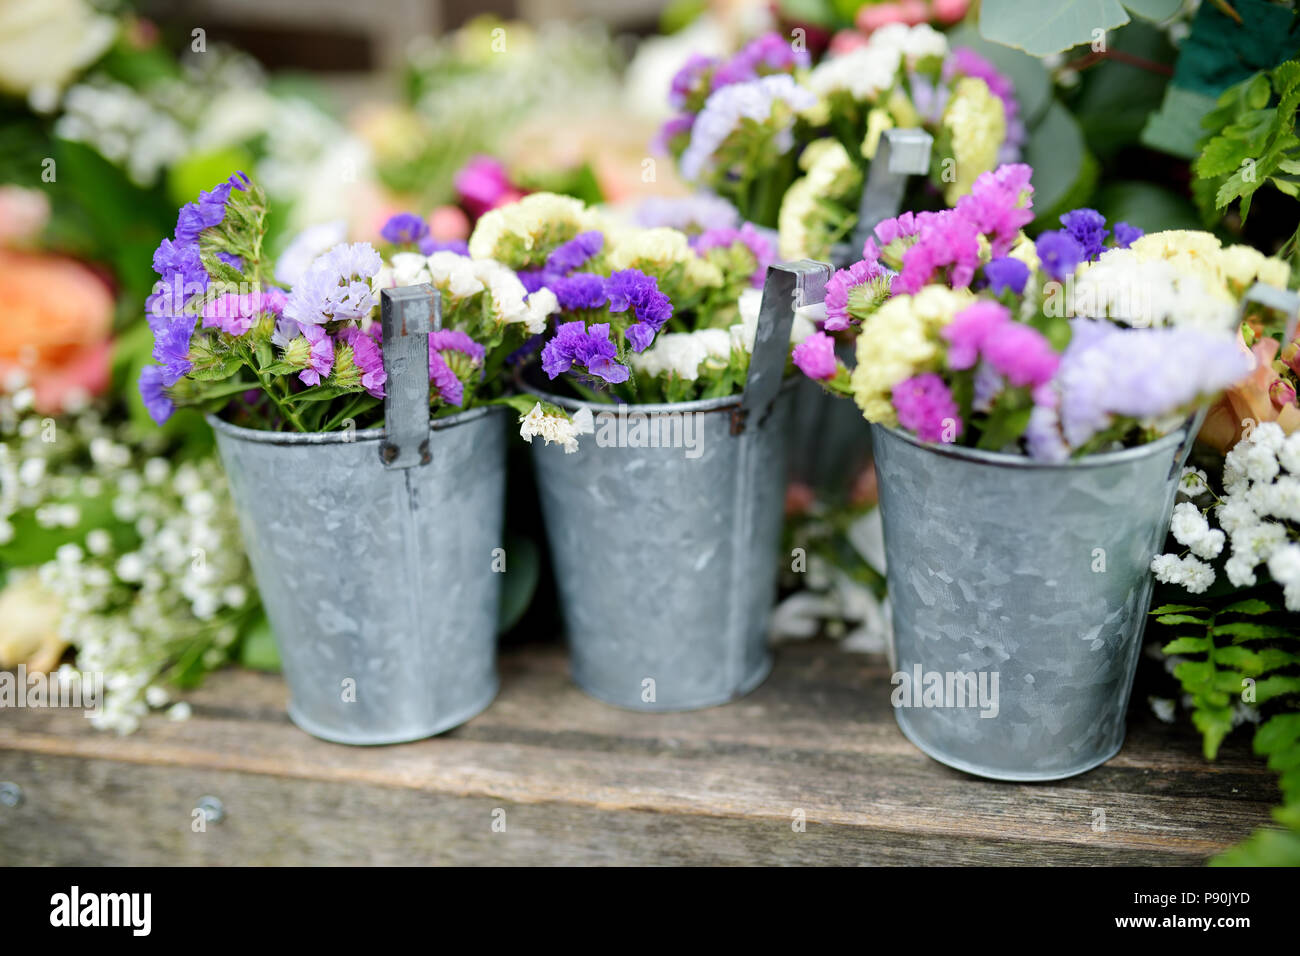 Three buckets of beautiful purple and white flowers prepared for wedding ceremony or another festive event Stock Photo